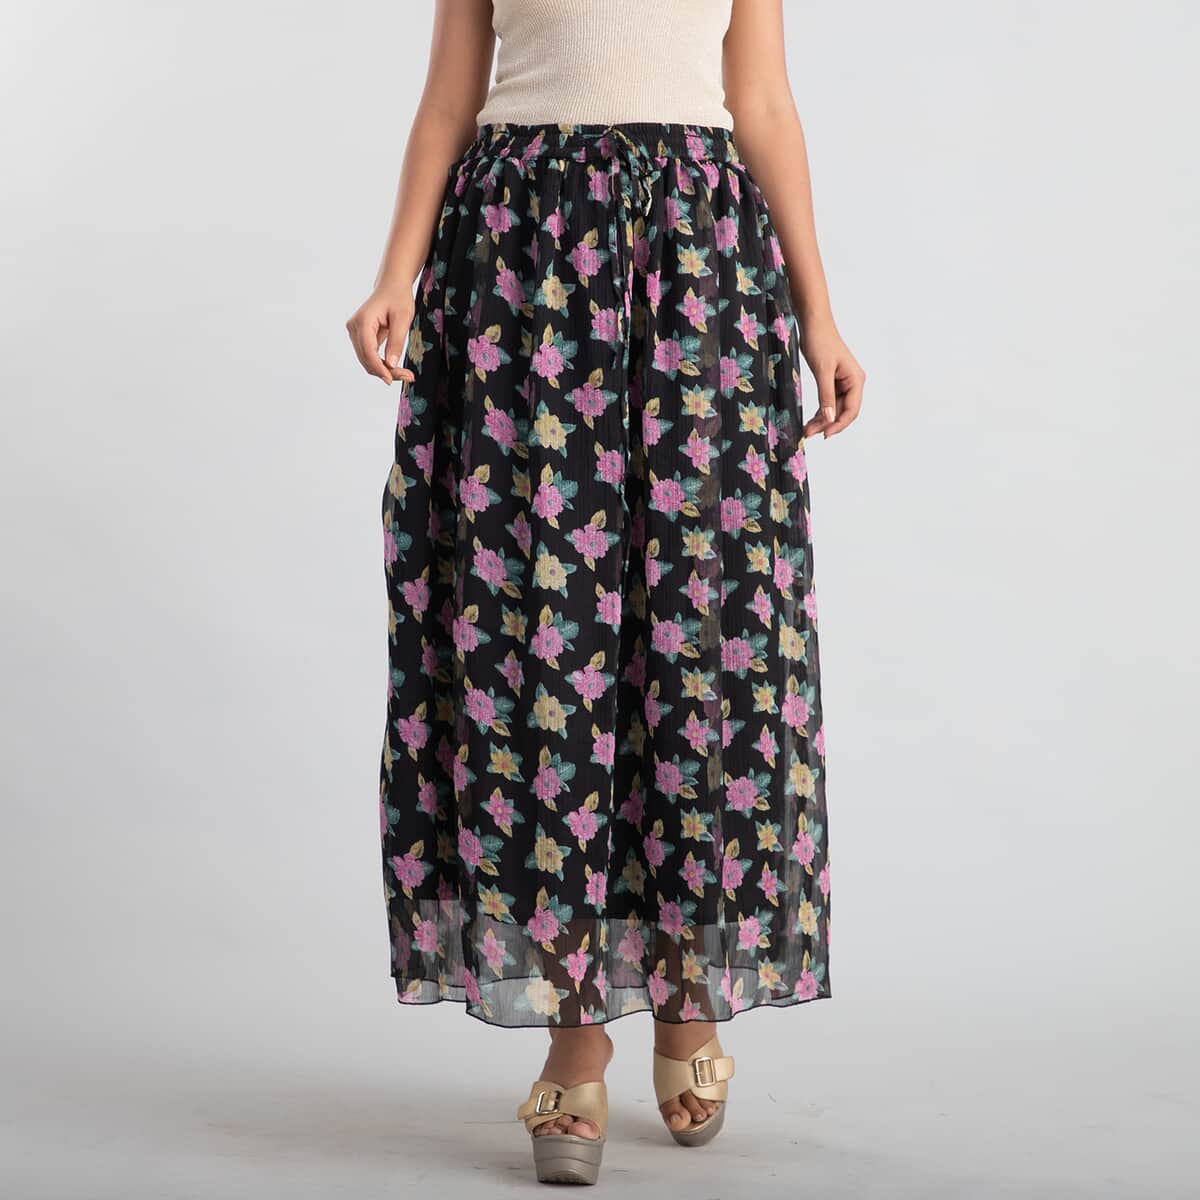 JOVIE Black Floral Printed Skirt with Drawstring - One Size Fits Most image number 0